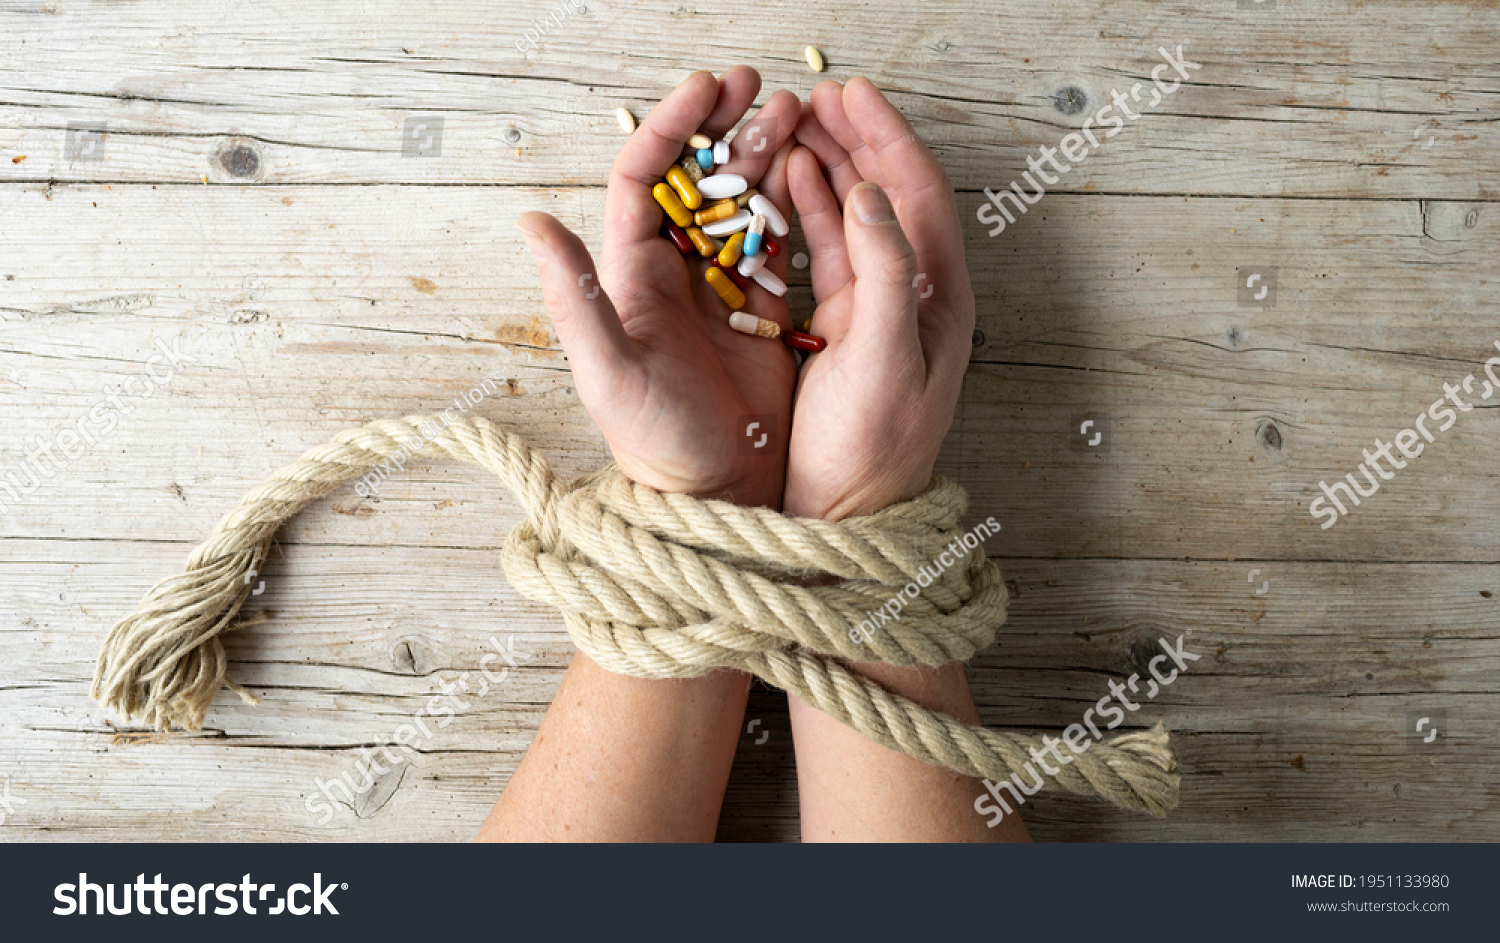 Hands of man are tied with a rope and in his hands he holds many different pills, concept addiction, drug addiction, photo taken from above #1951133980